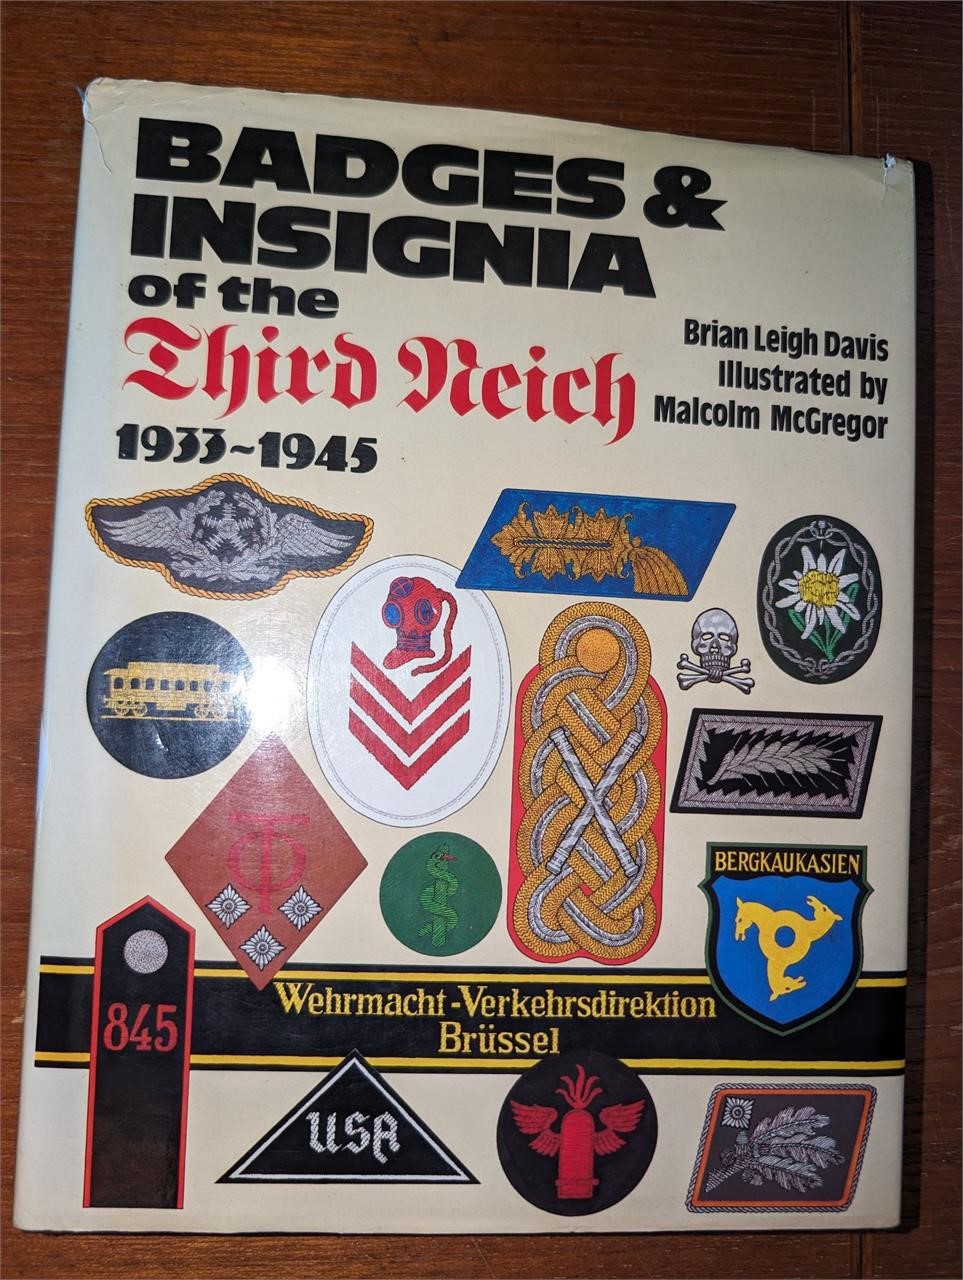 Badges & Insignia of Third Reich 1933 - 1945